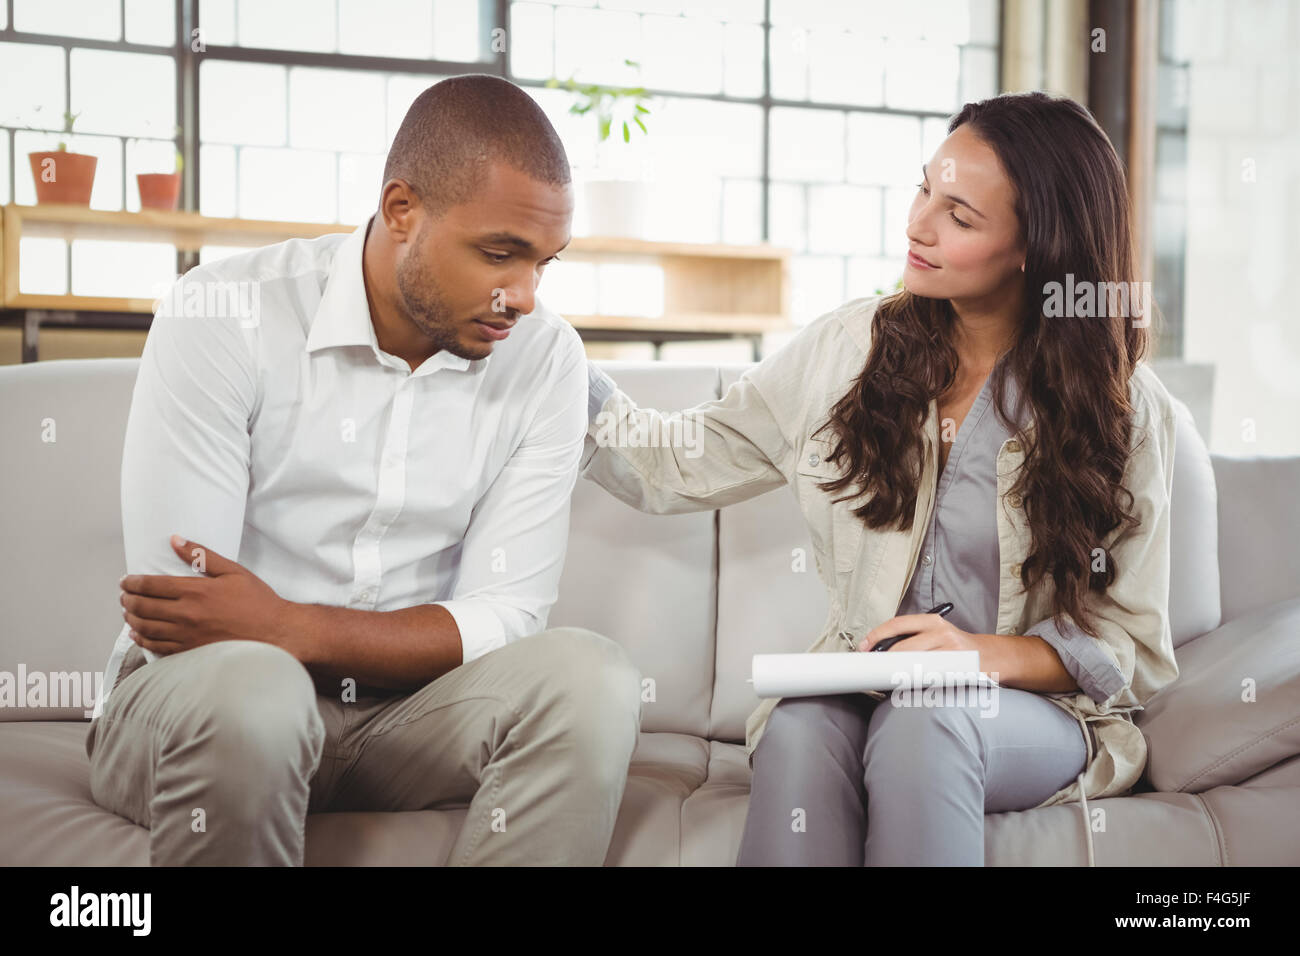 Therapist counselling patient Stock Photo